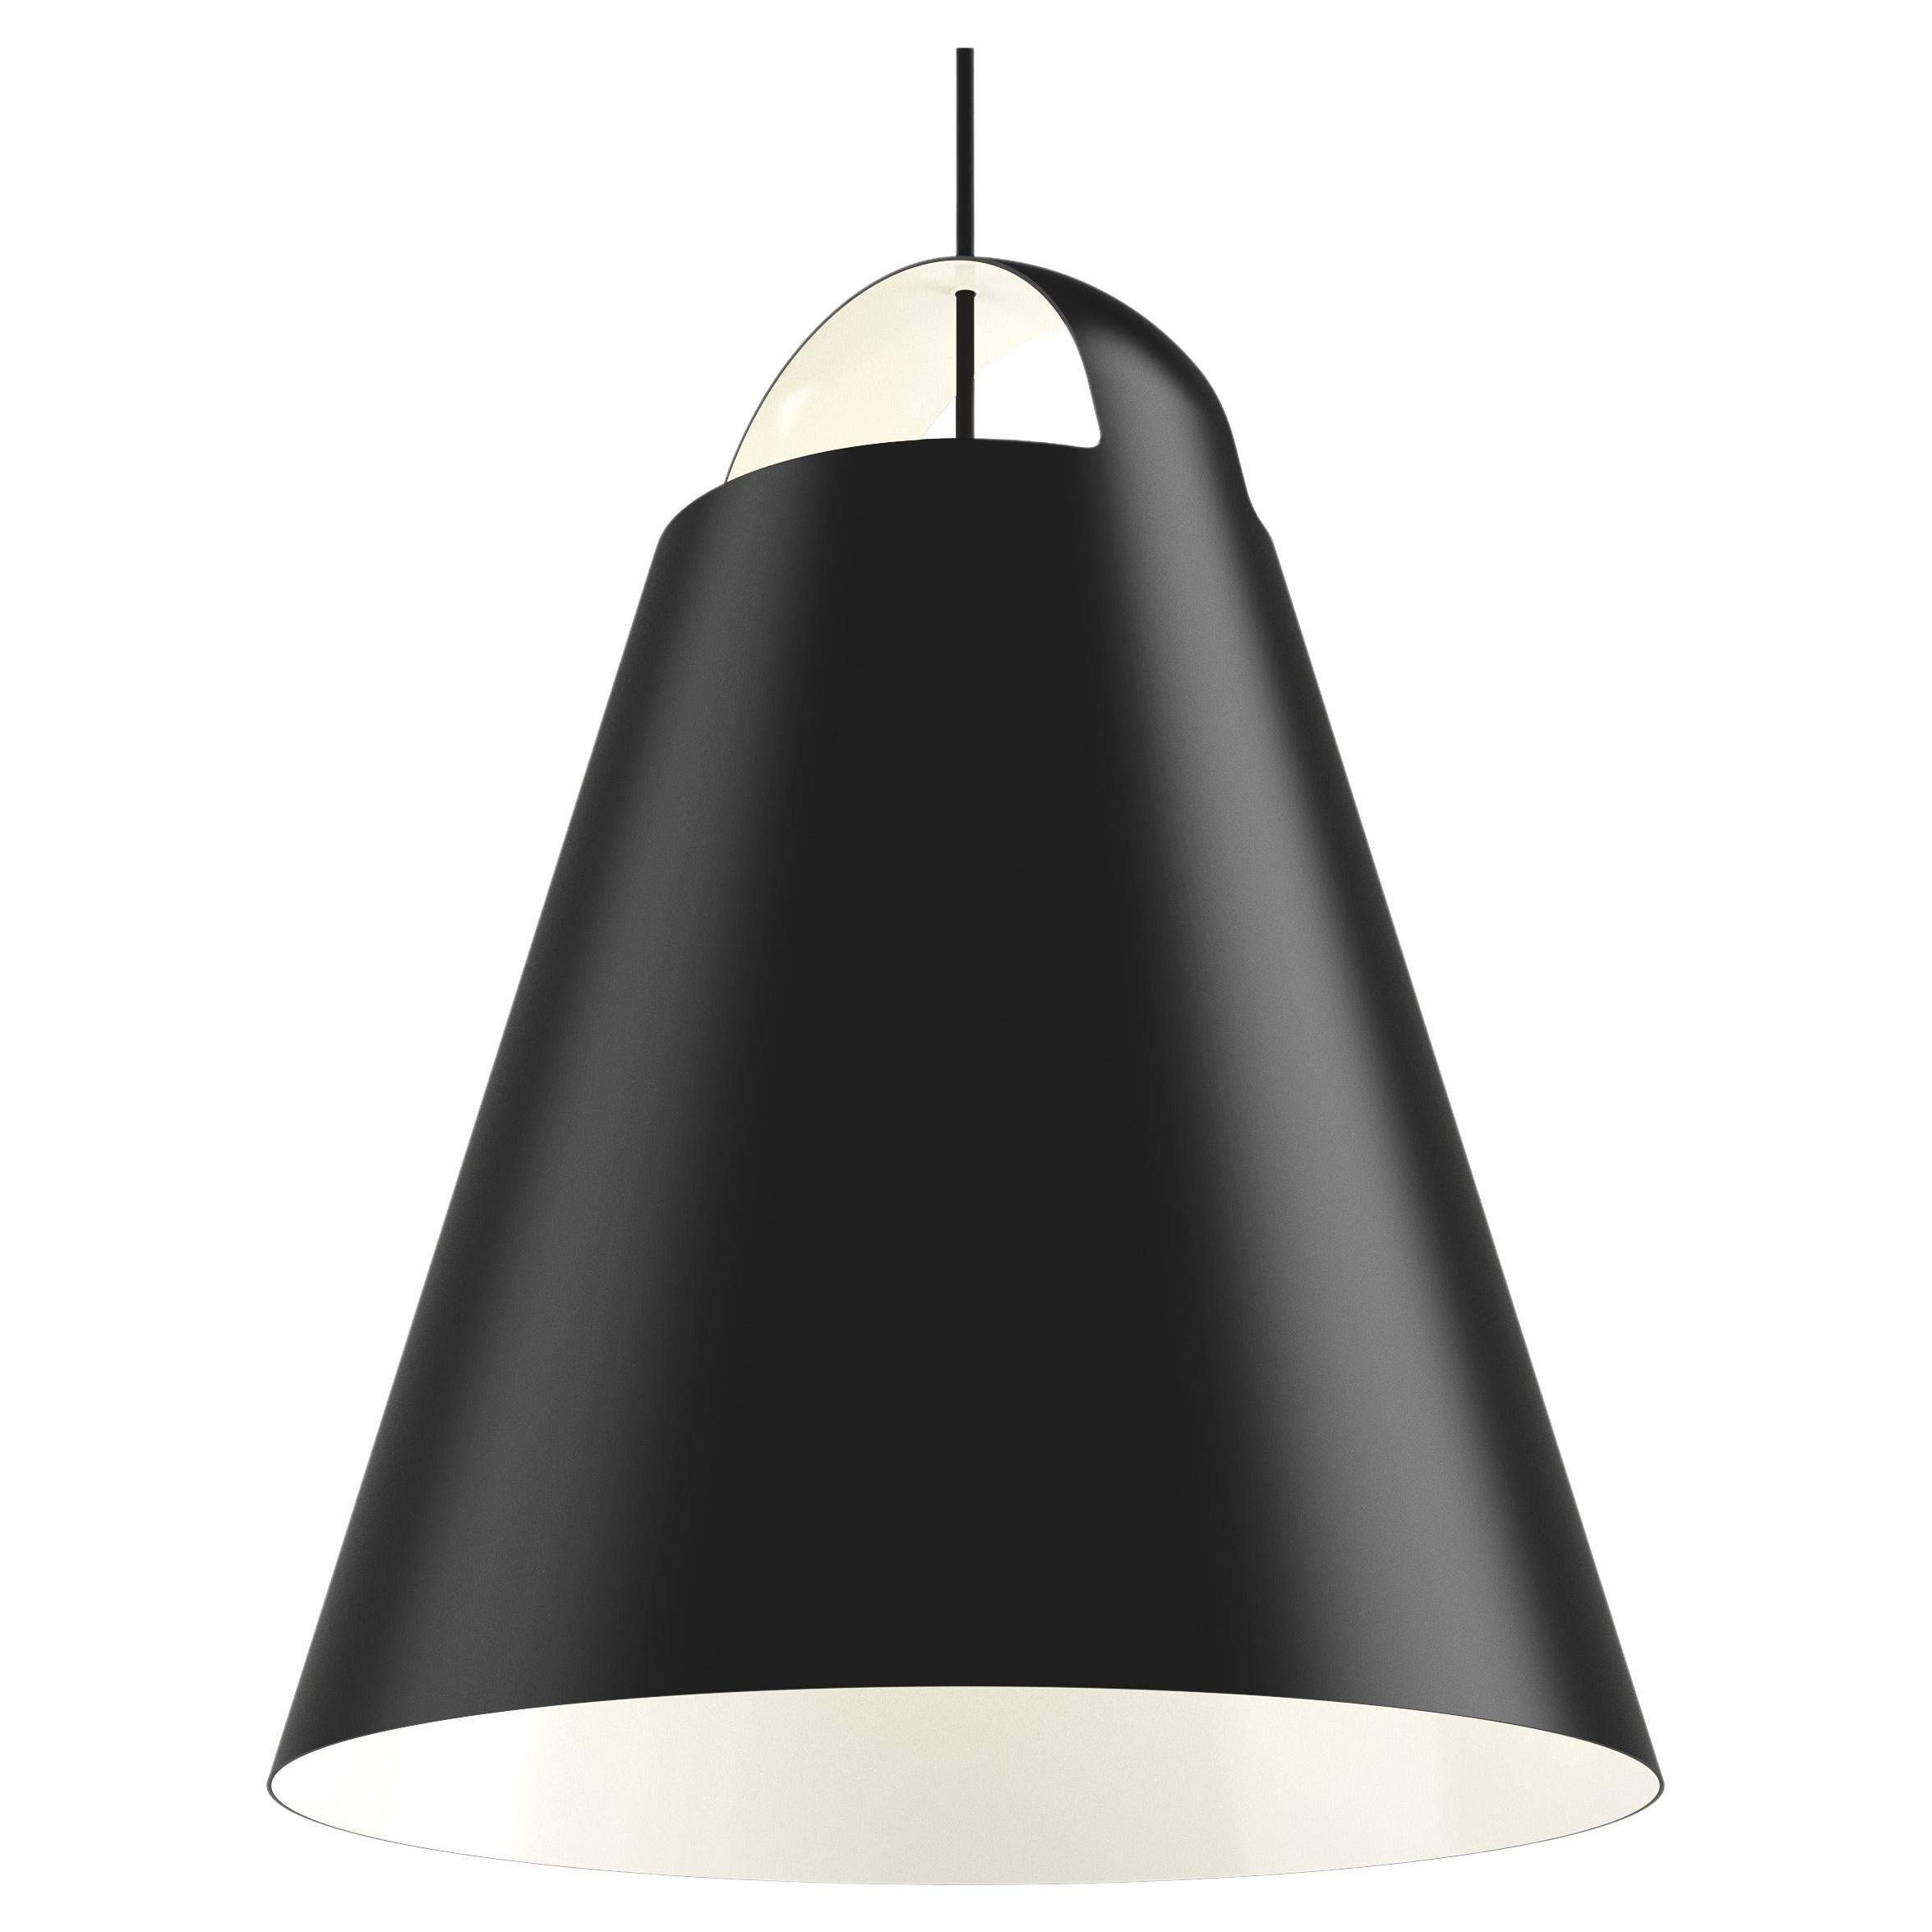 Louis Poulsen Large above Pendant Lamp in Black by Mads Odgård